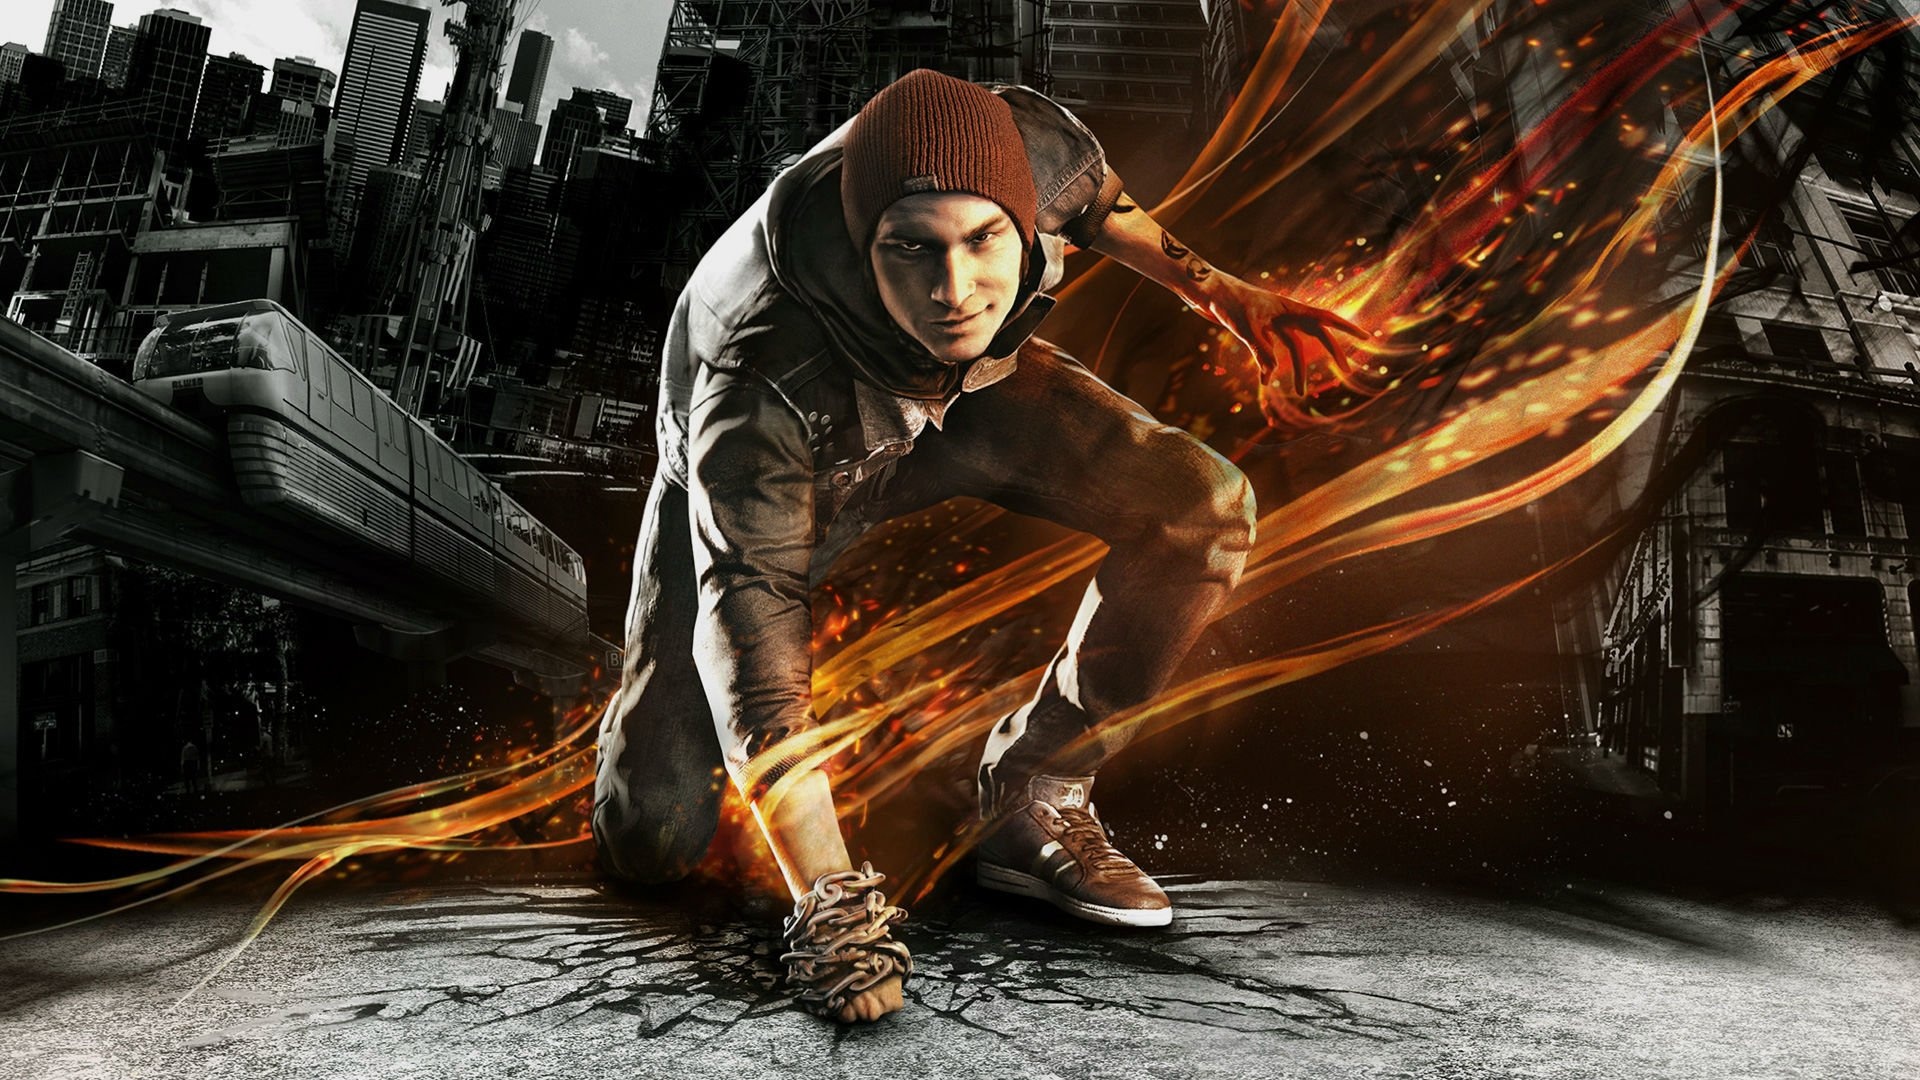 inFAMOUS: Second Son, HD wallpapers, Breathtaking backgrounds, Video game art, 1920x1080 Full HD Desktop